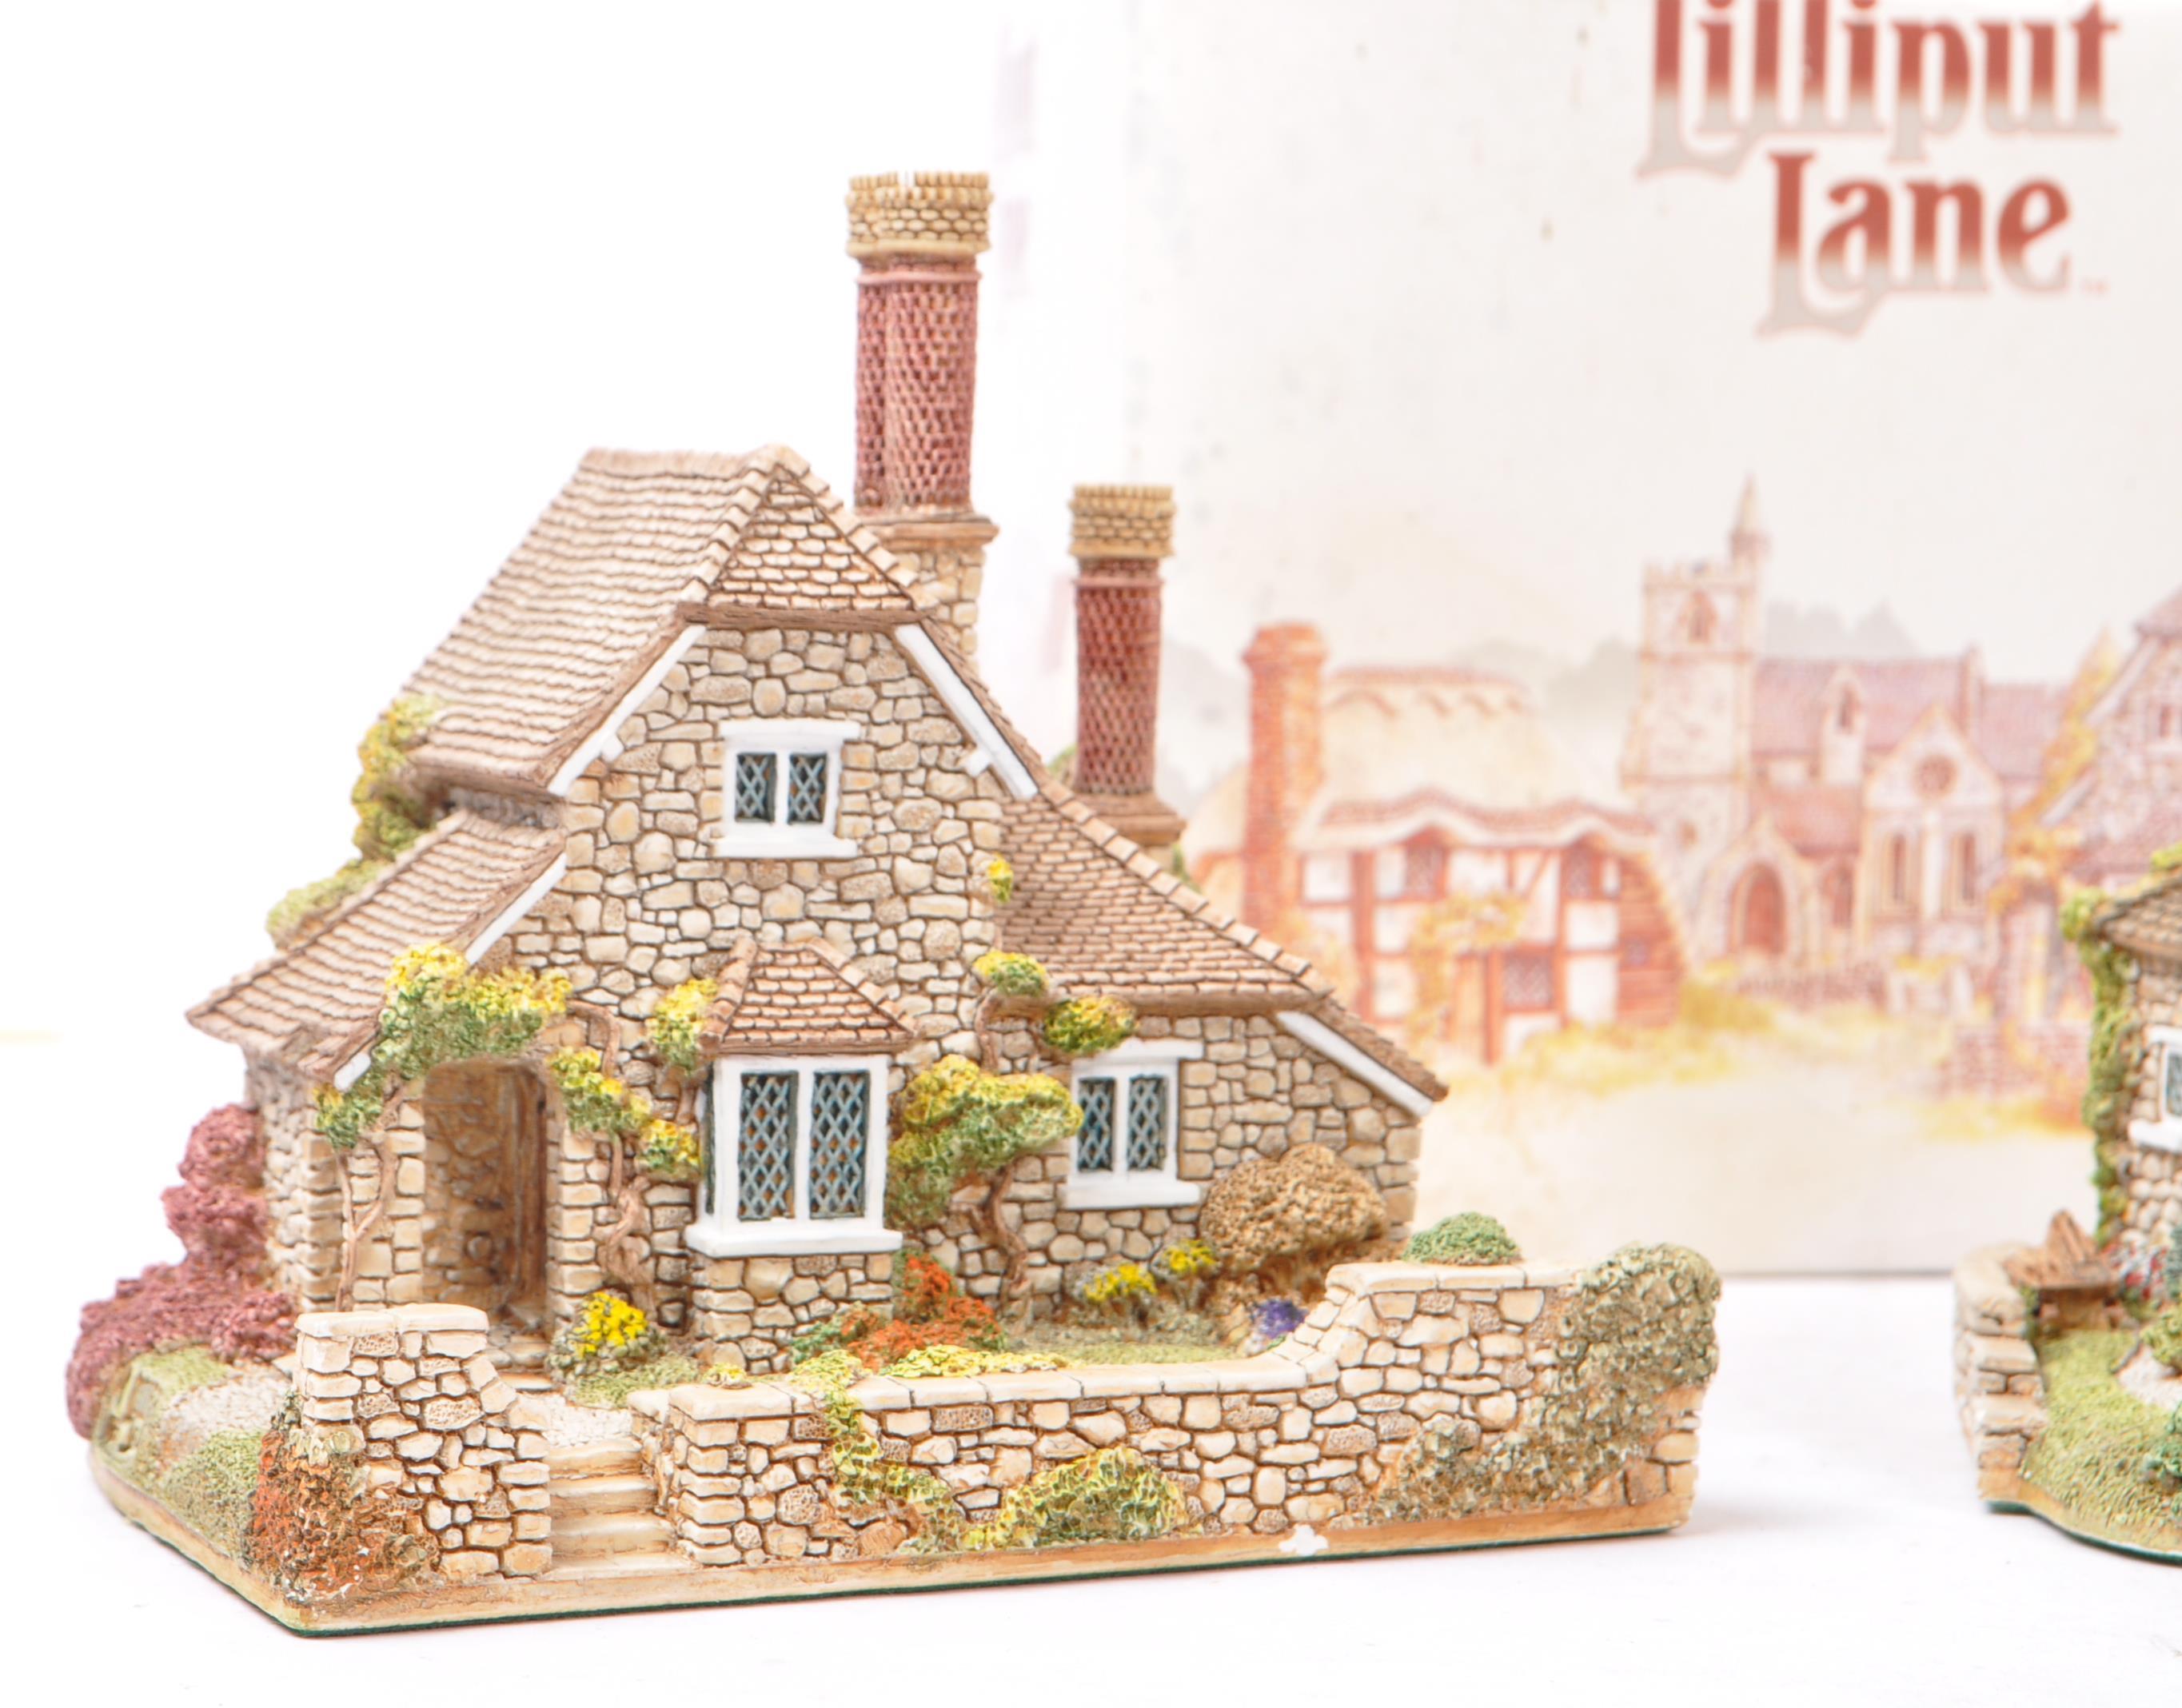 LILLIPUT LANE - COLLECTION OF HOUSE / COTTAGE RESIN FIGURINES - Image 2 of 9